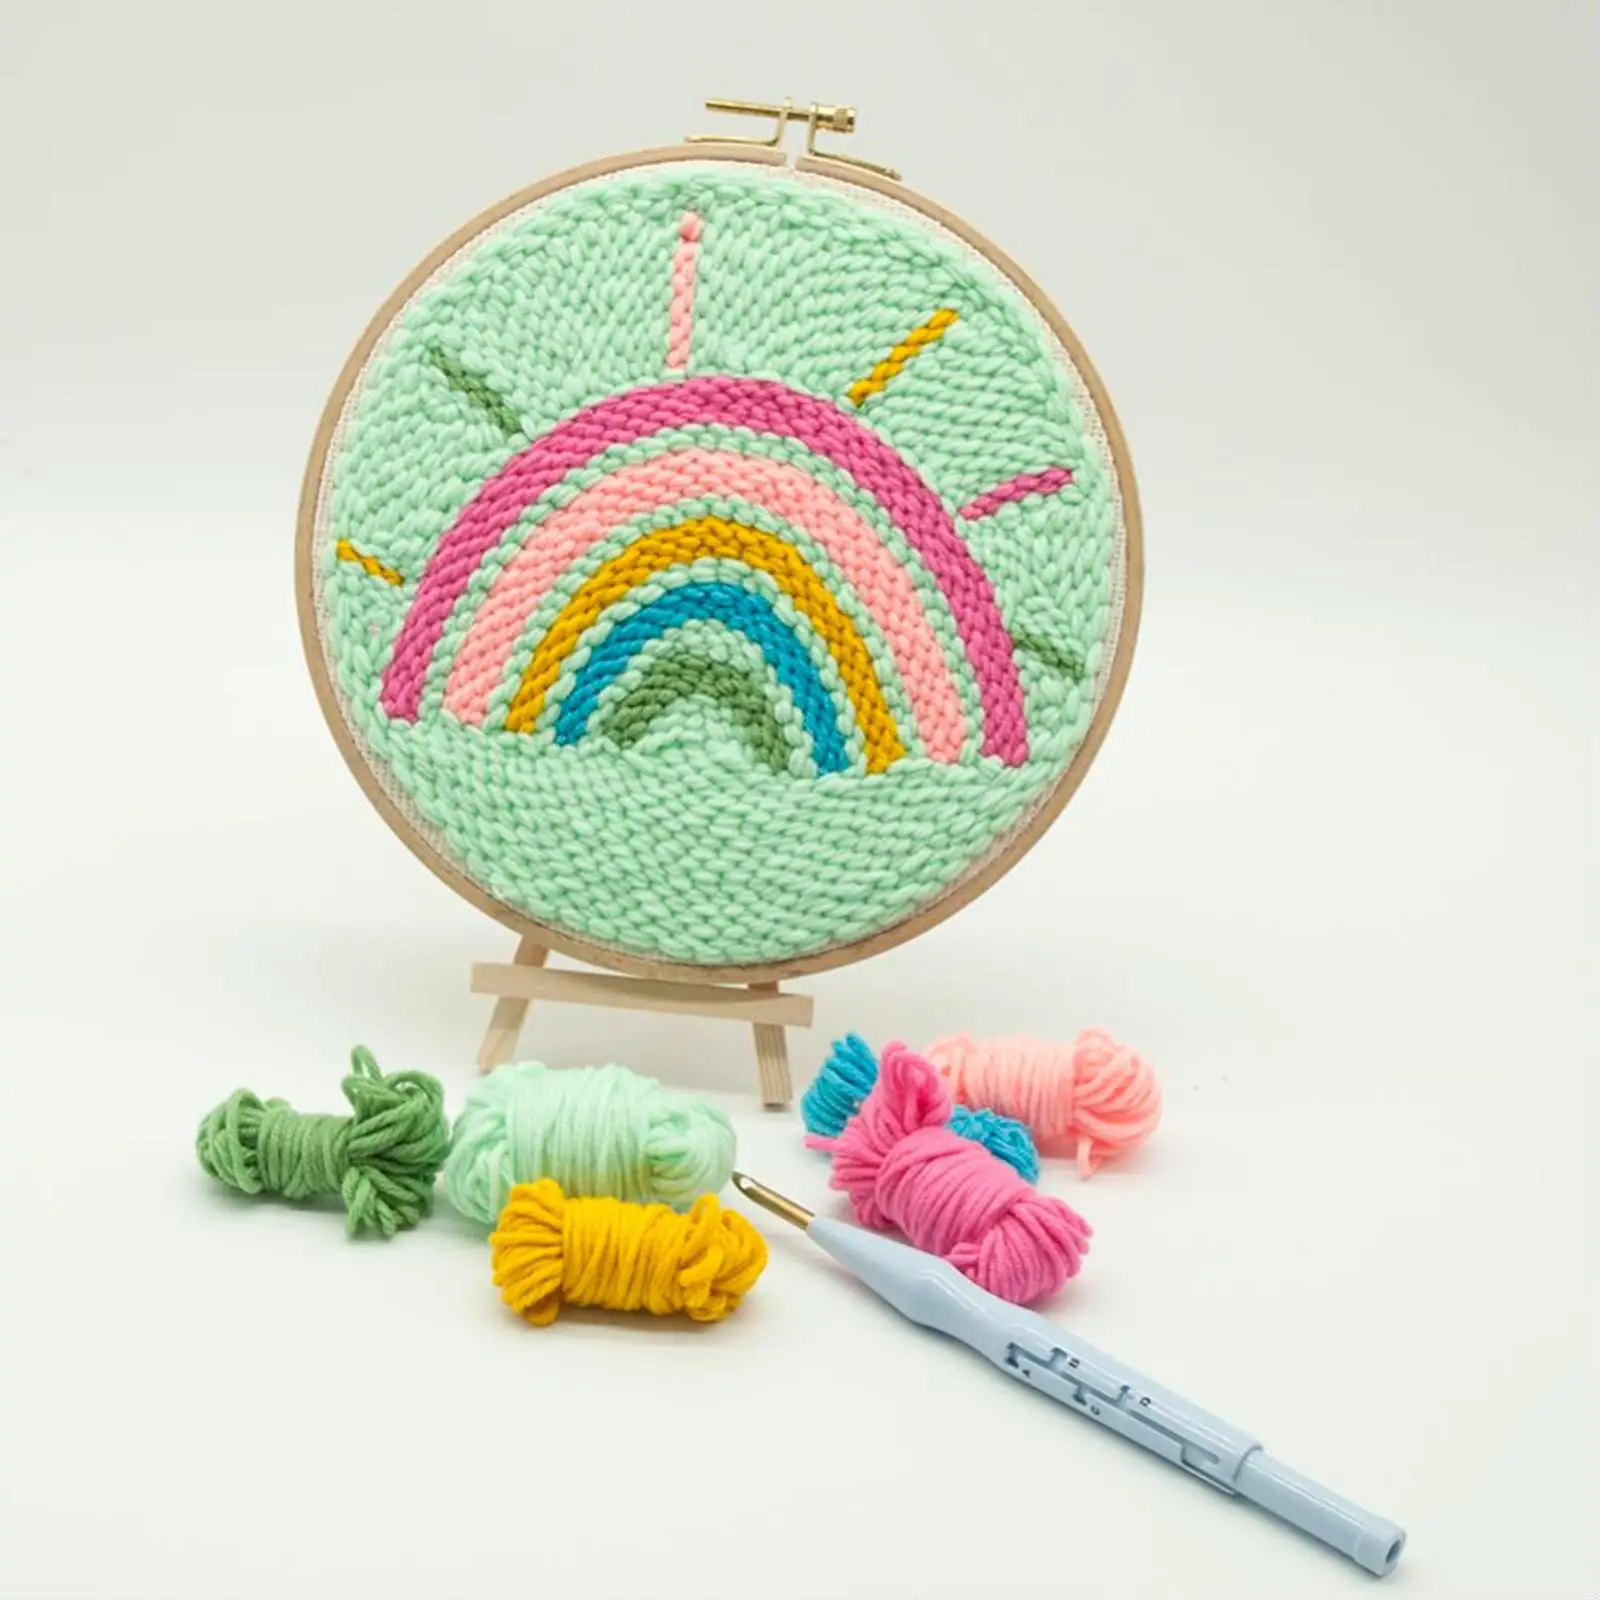 Punch Needle Embroidery Starter Kits Rainbow Embroidery Hoop Instructions Sewing Needlework Fabric Pattern Hand Craft Beginner